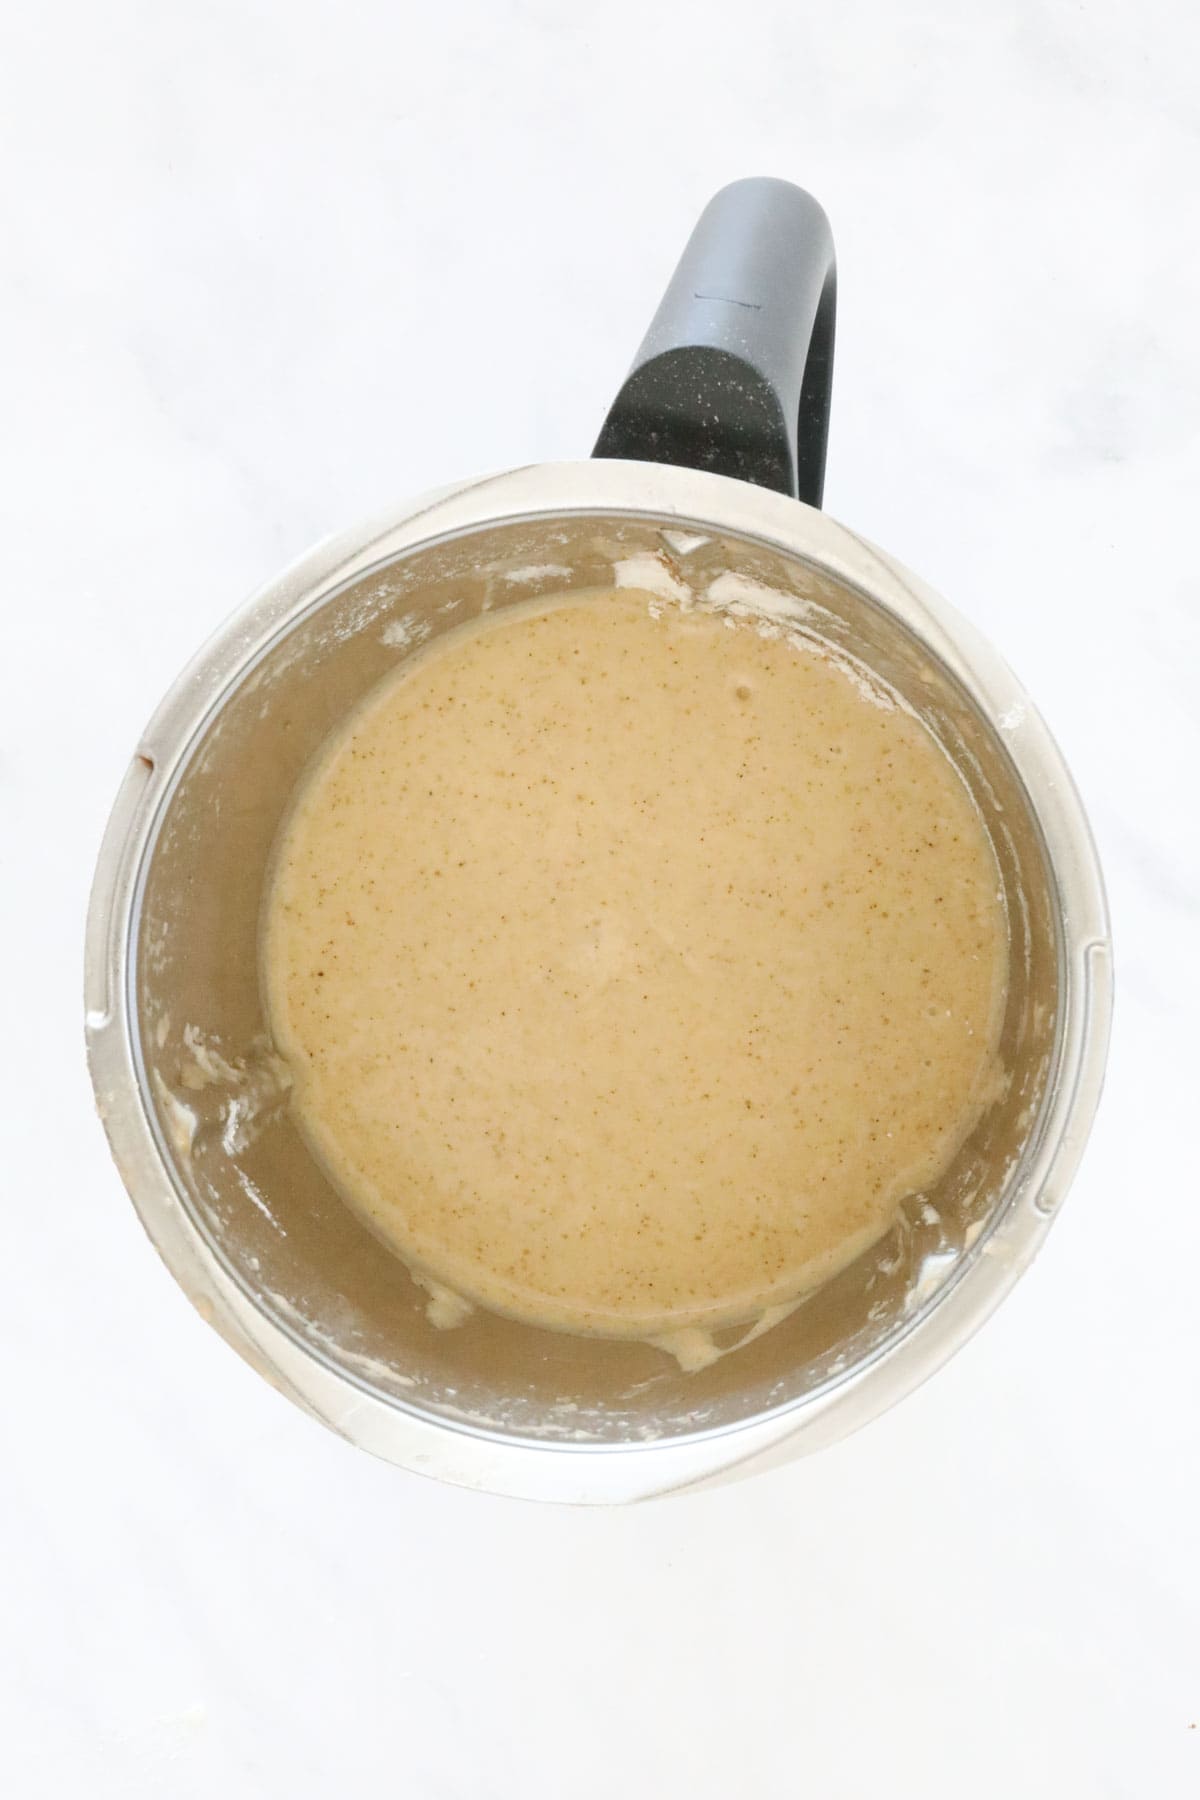 Muffin batter in a Thermomix.